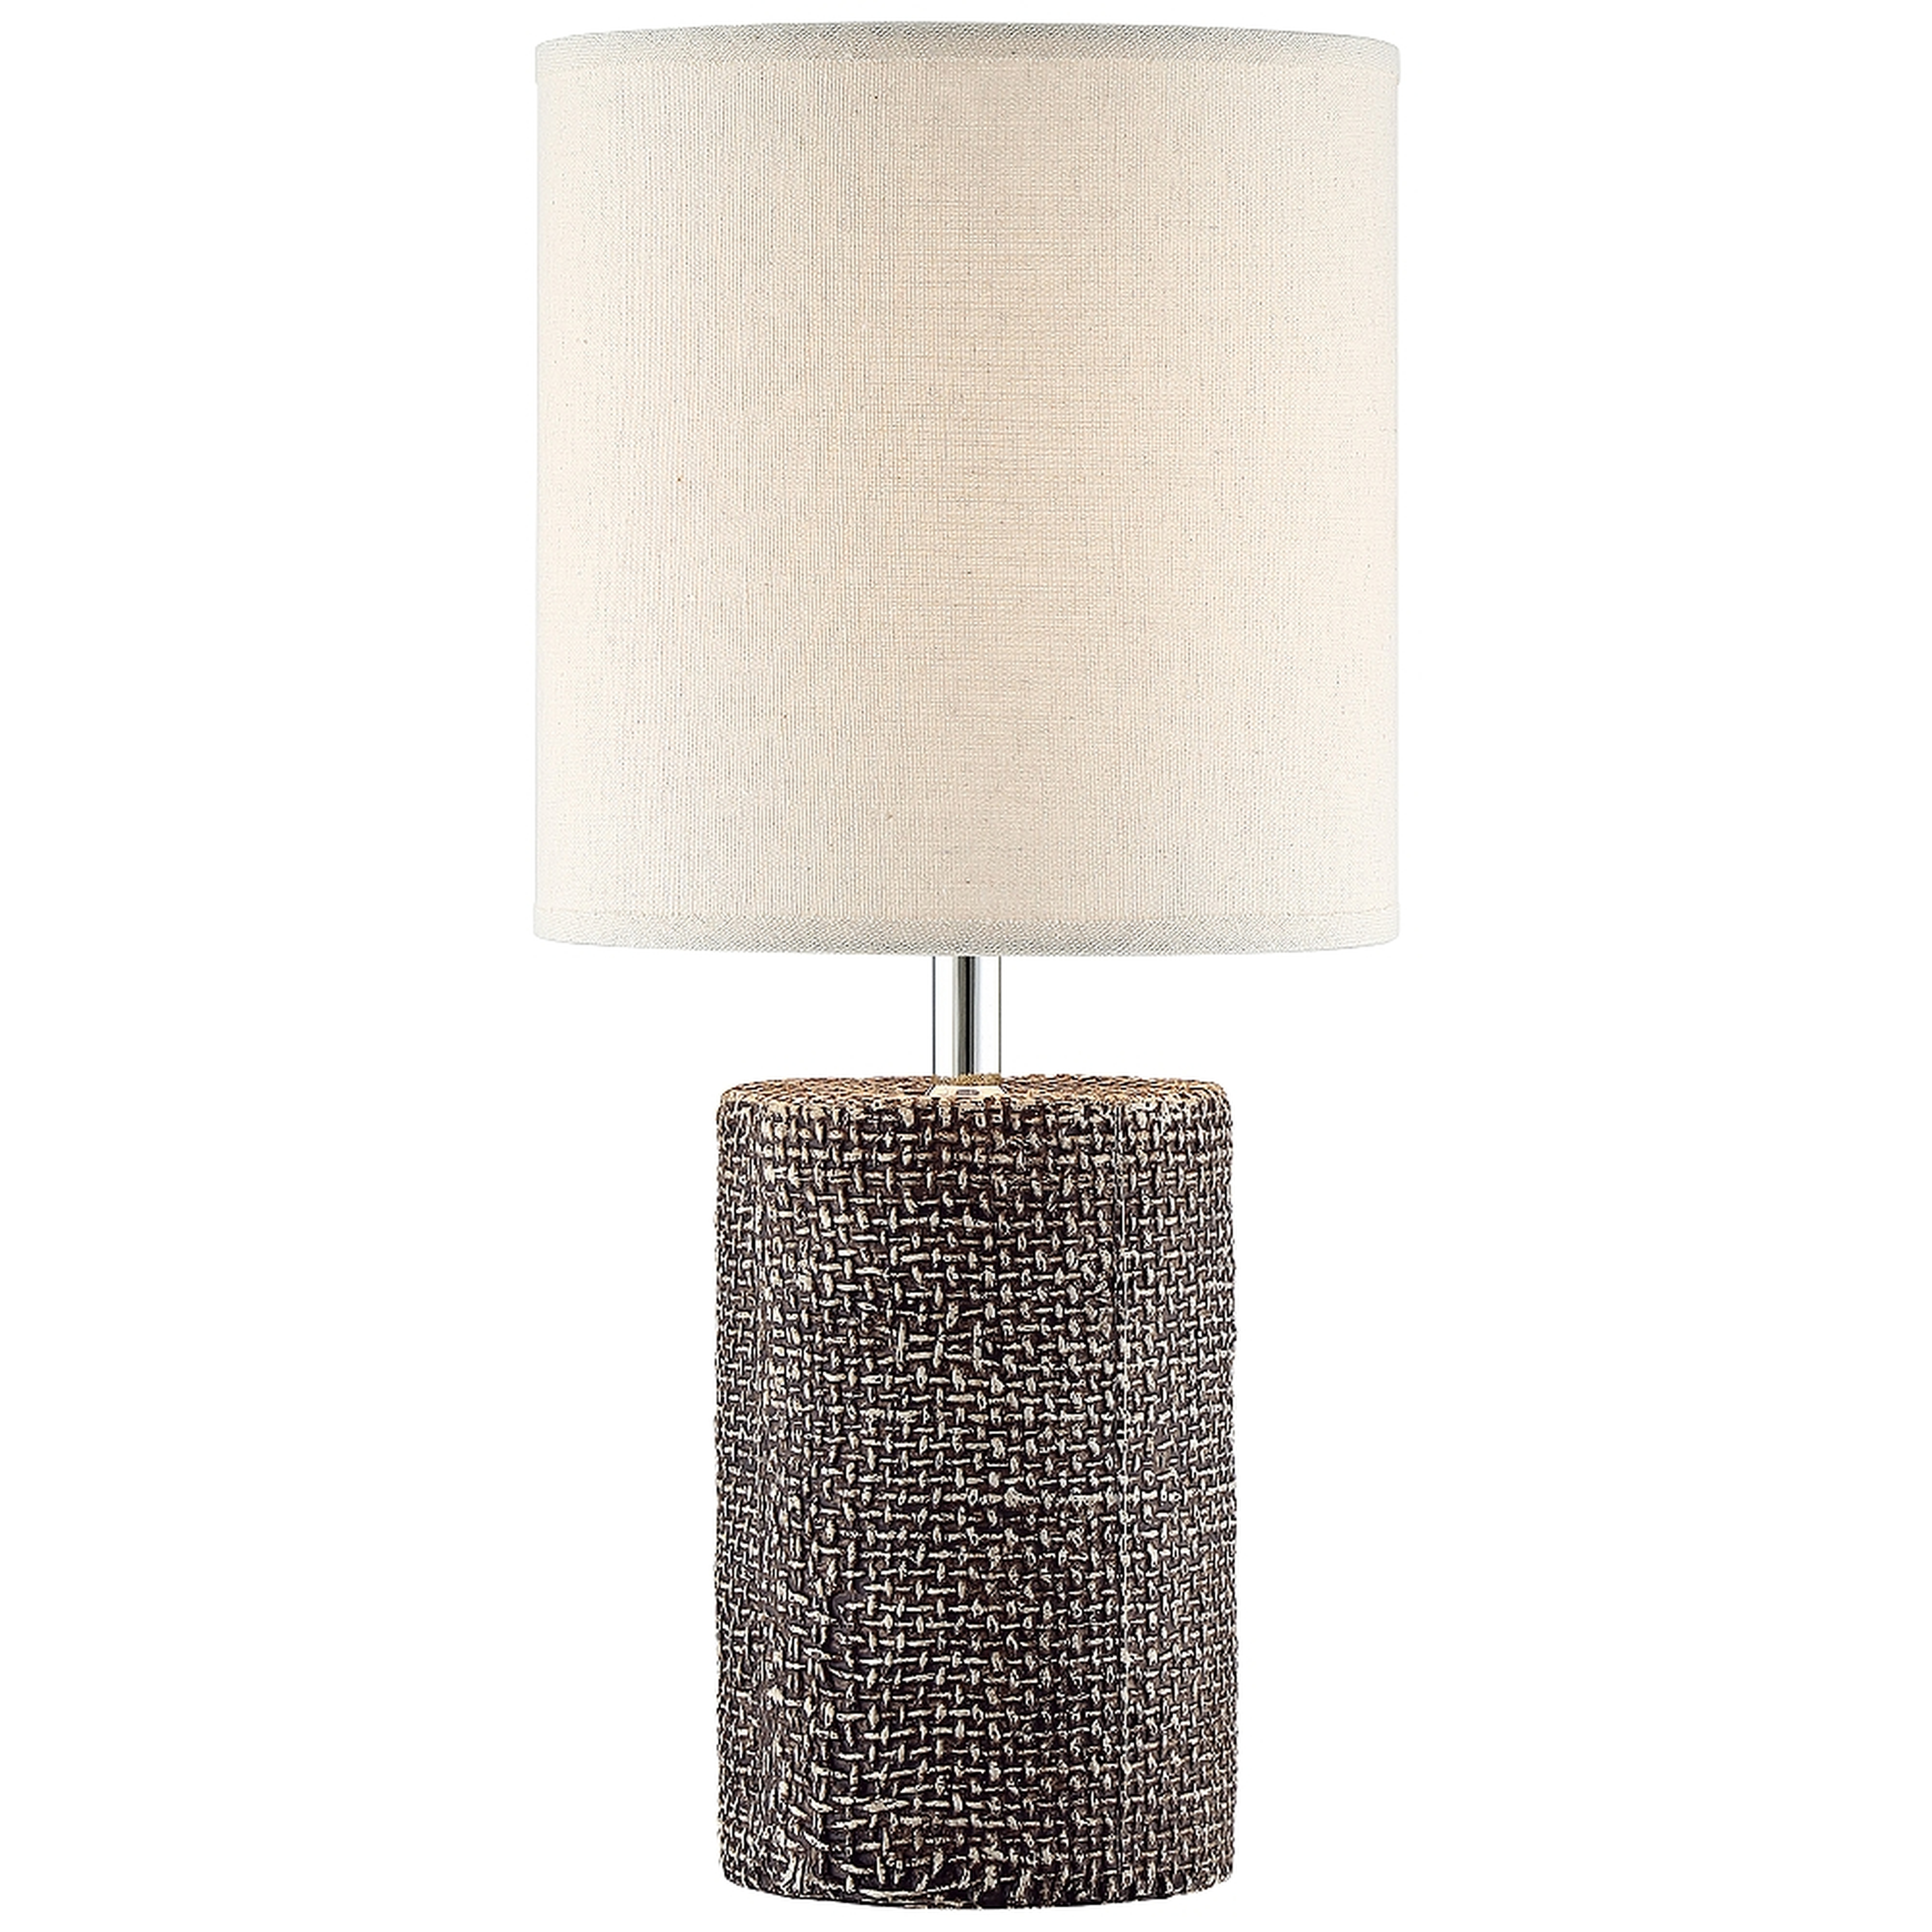 Lite Source Dustin 17 3/4" High Dark Brown Accent Table Lamp - Style # 69R36 - Lamps Plus